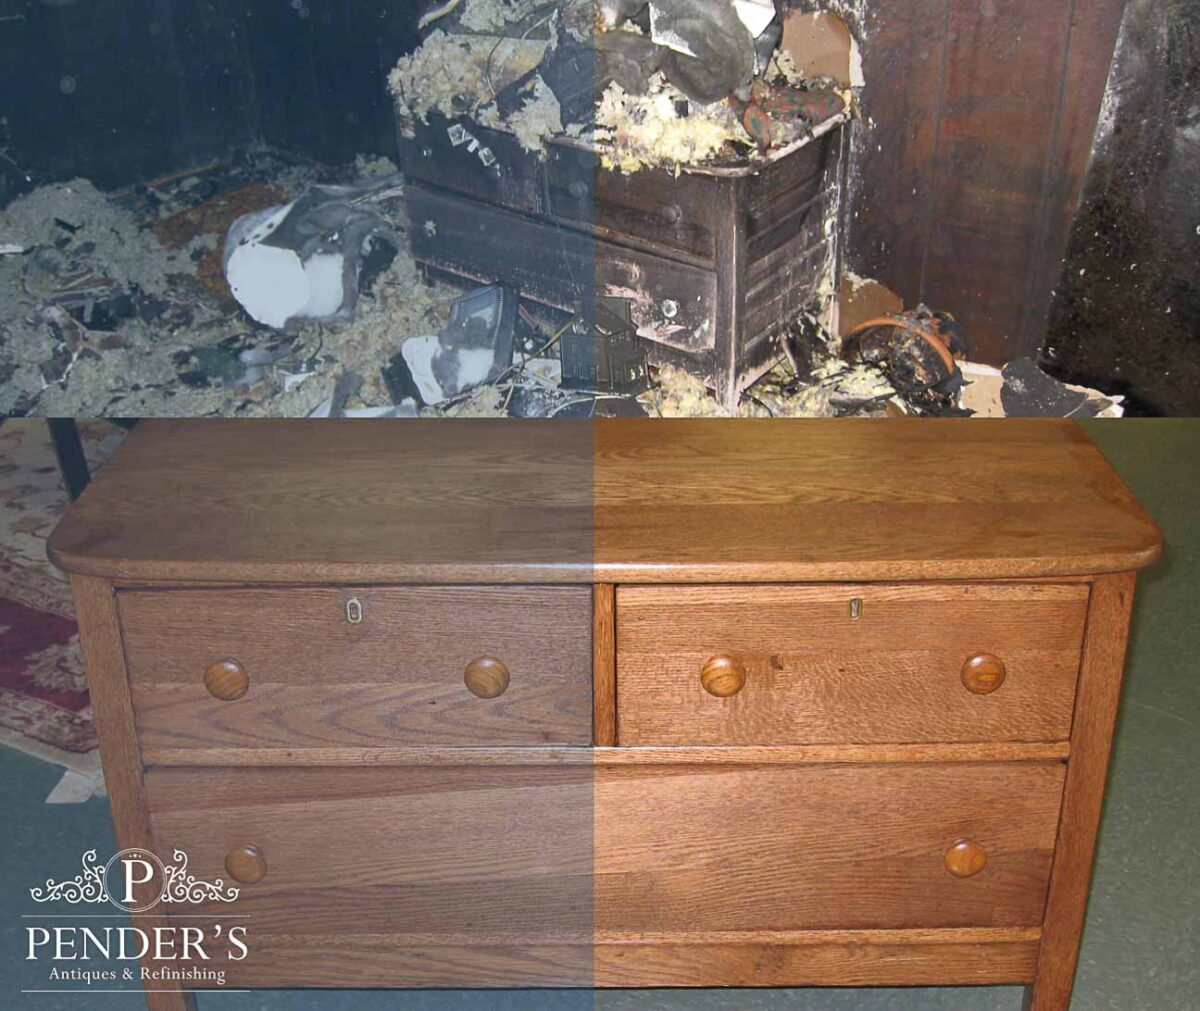 before and after of a restored wooden dresser salvaged from a fire